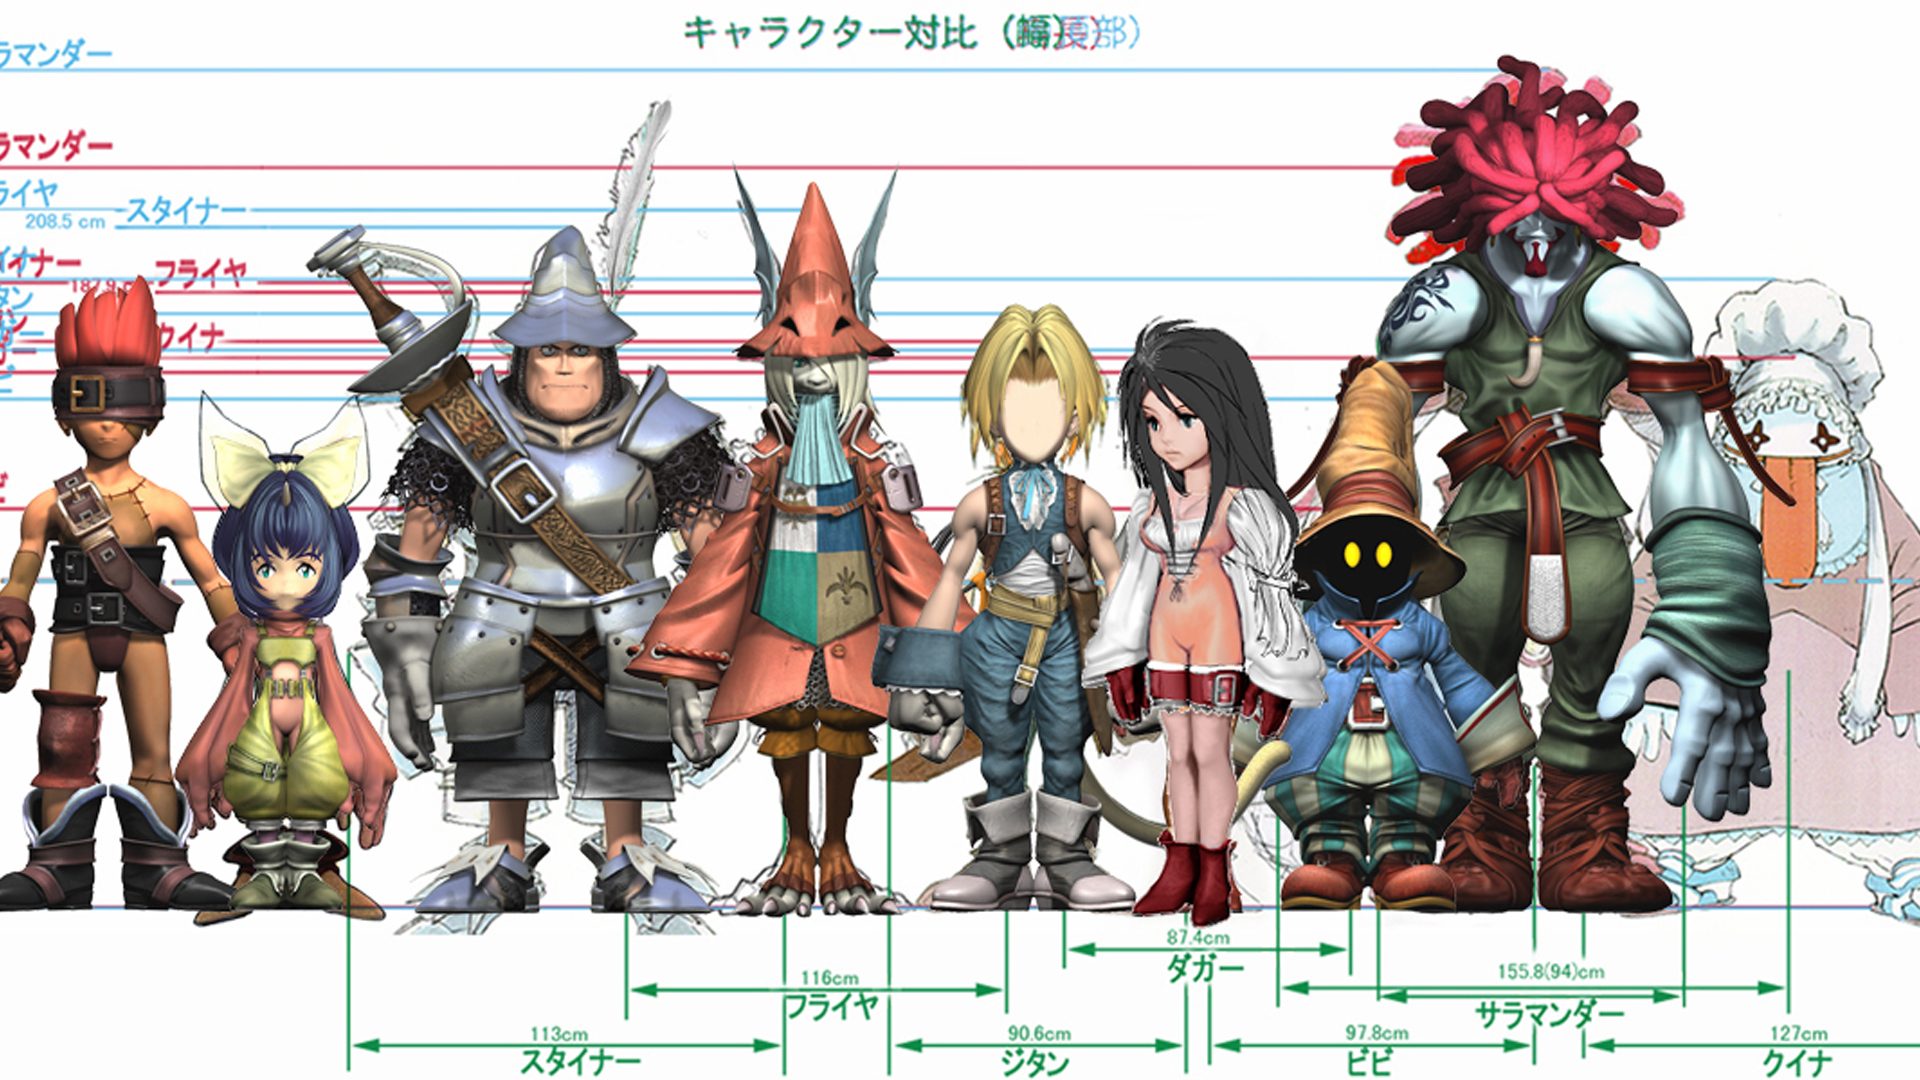 Memories Of Life Working On Final Fantasy IX, Available With PlayStation Now thumbnail